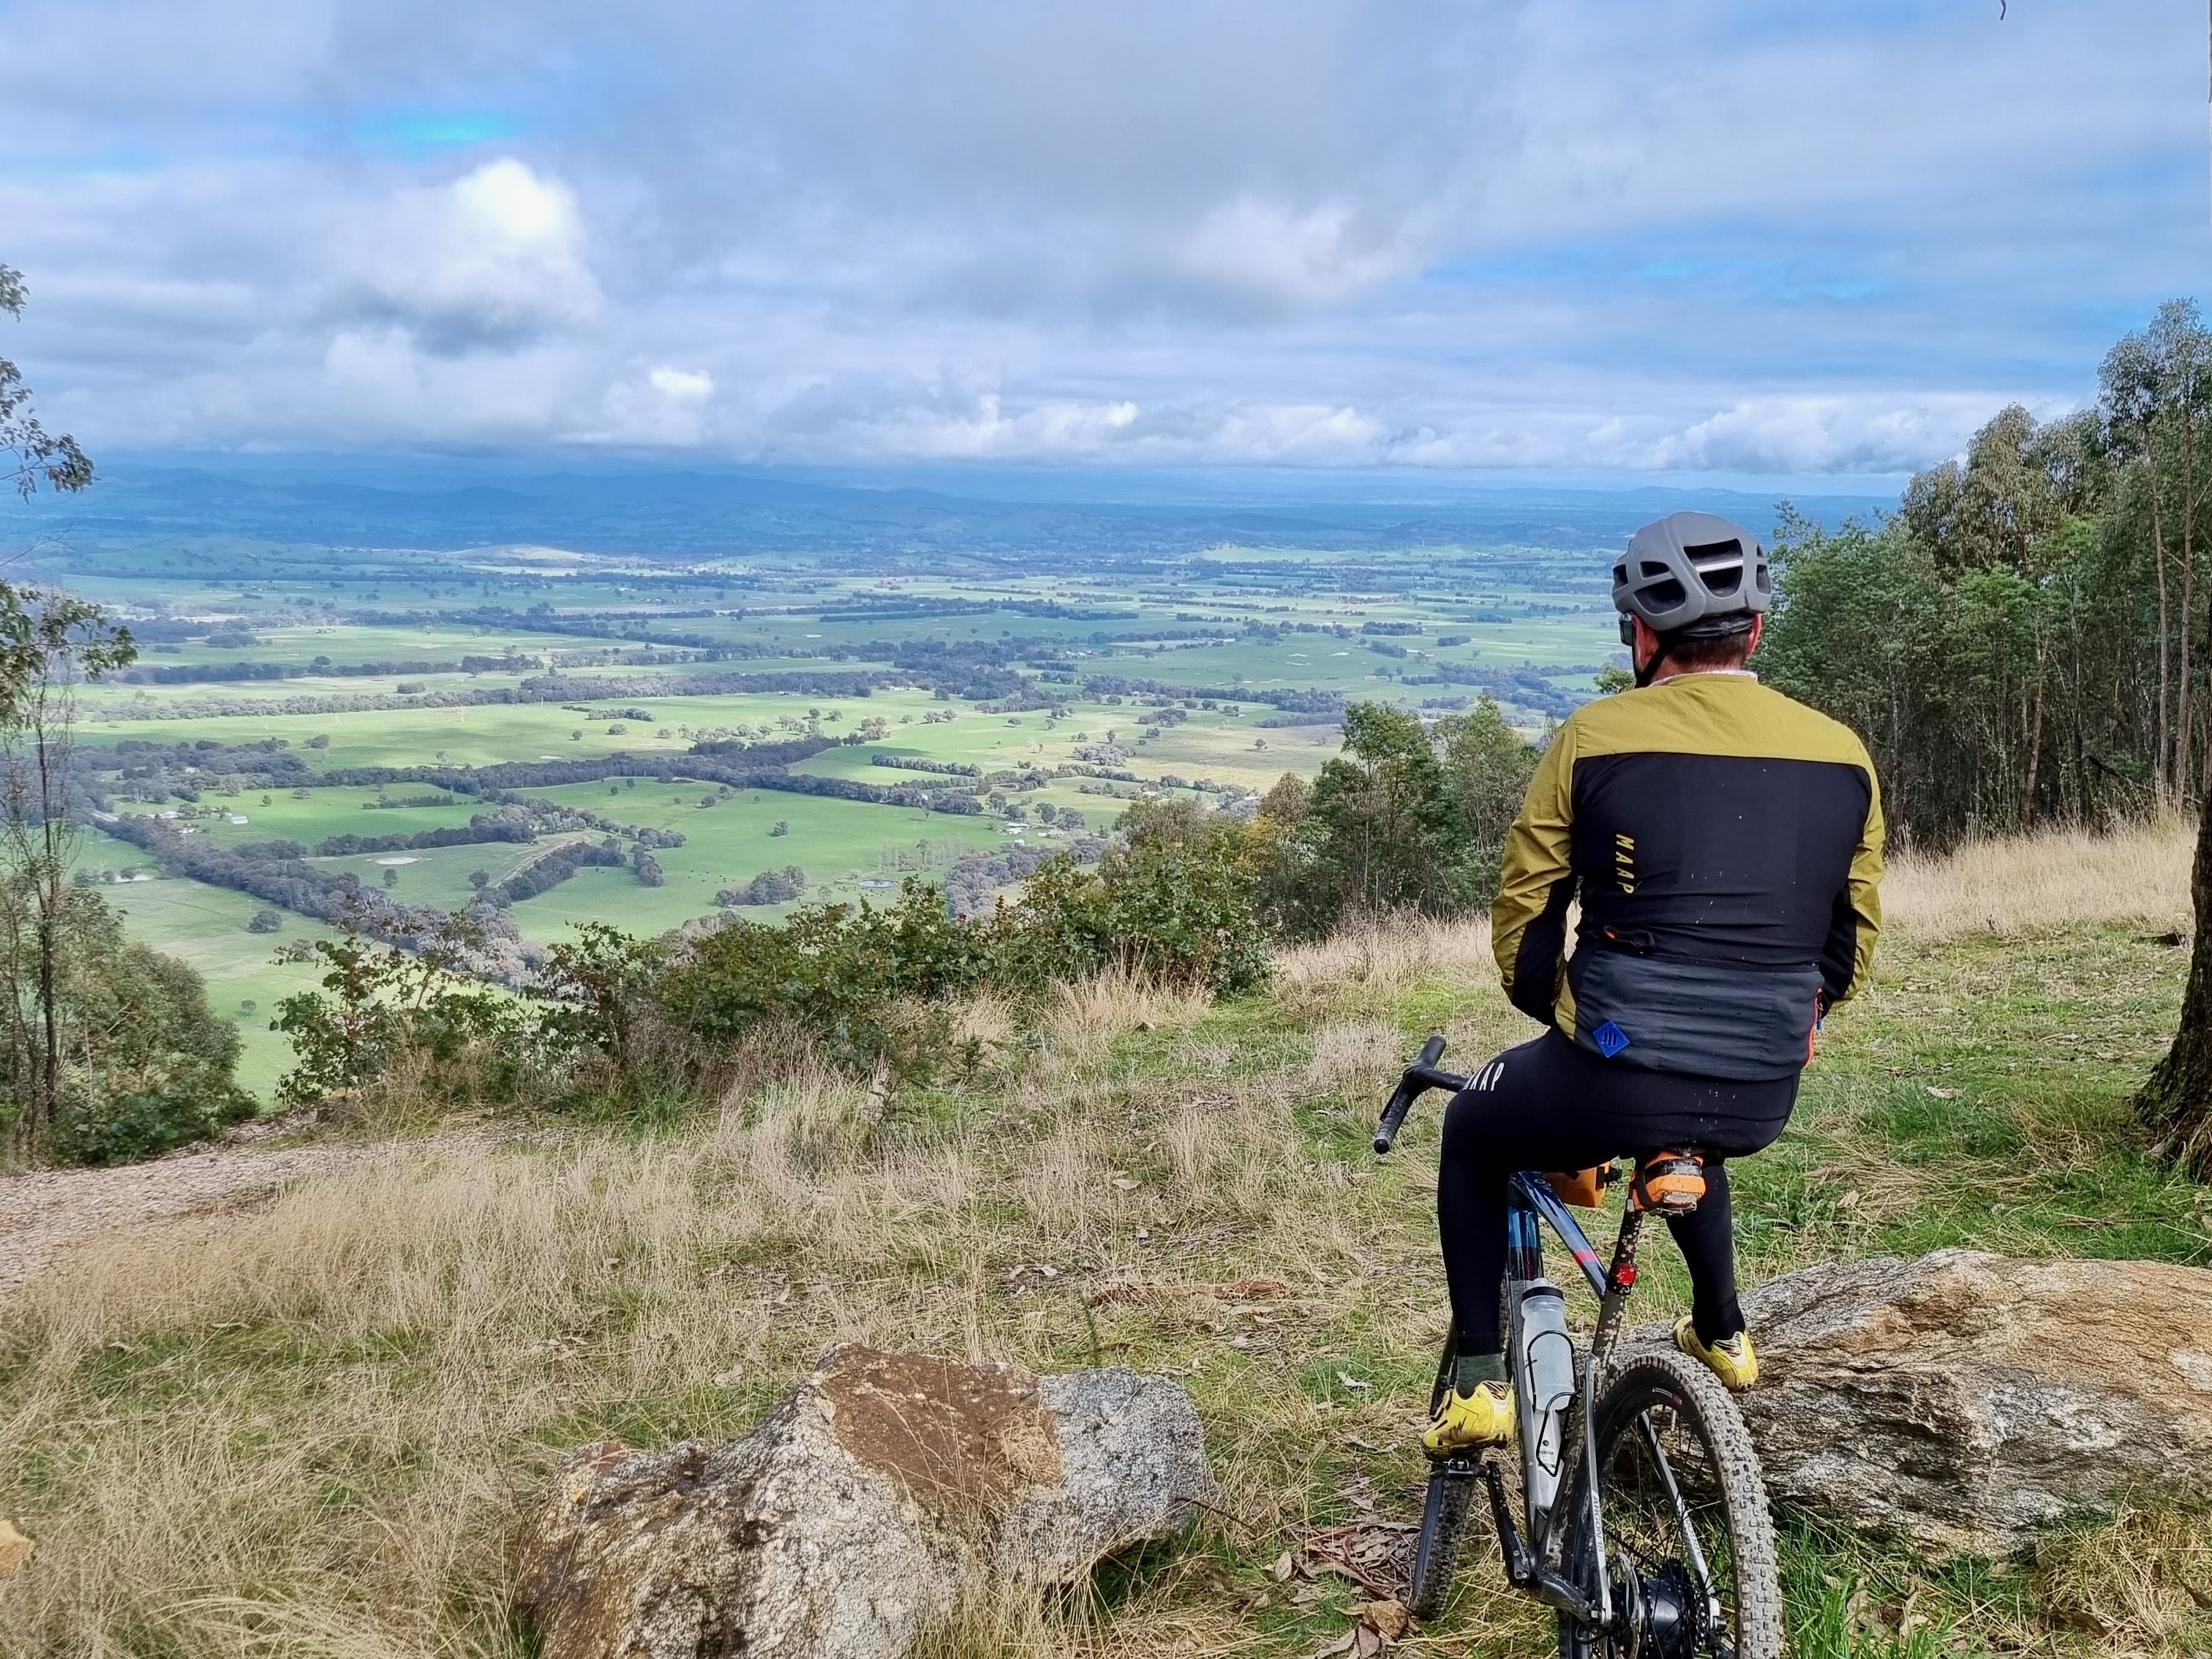 A cyclist stopped at the Murmungee lookout looking at the view of the surrounding valley and mountains off in the distance on a sunny day